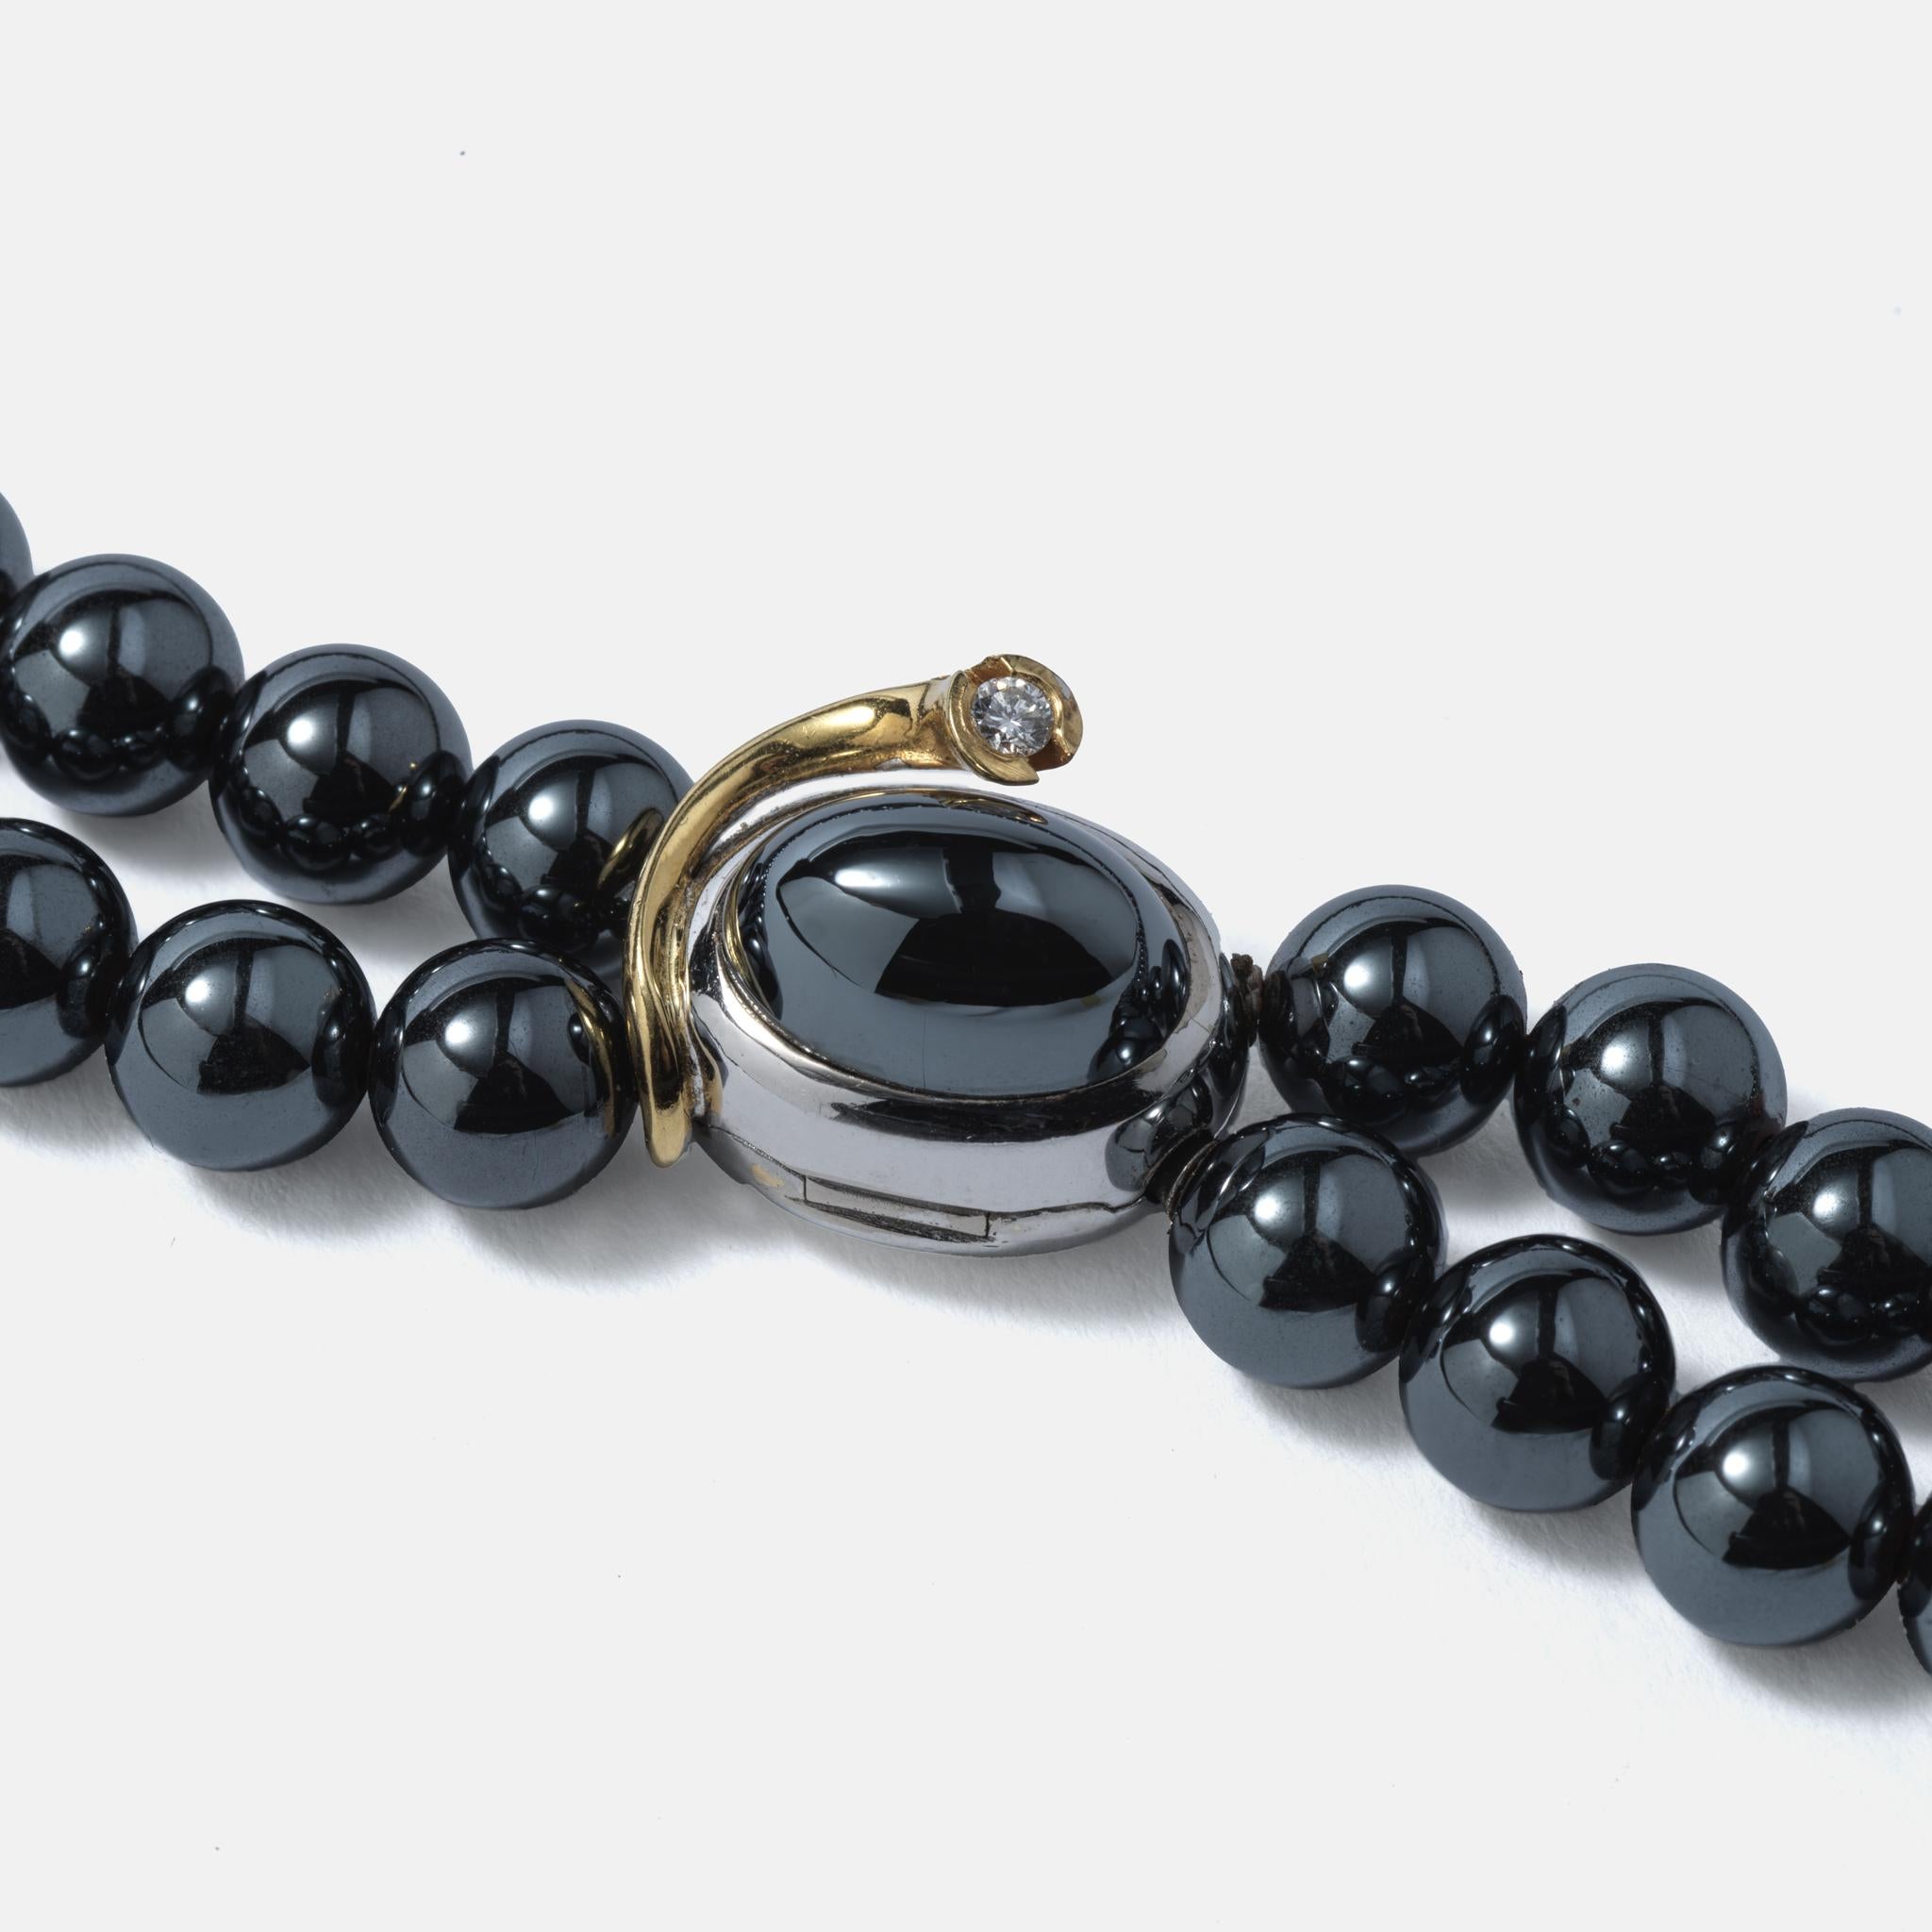 Brilliant Cut Ole Lynggaard necklace with hematite beads. Lock made of gold with a diamond. For Sale